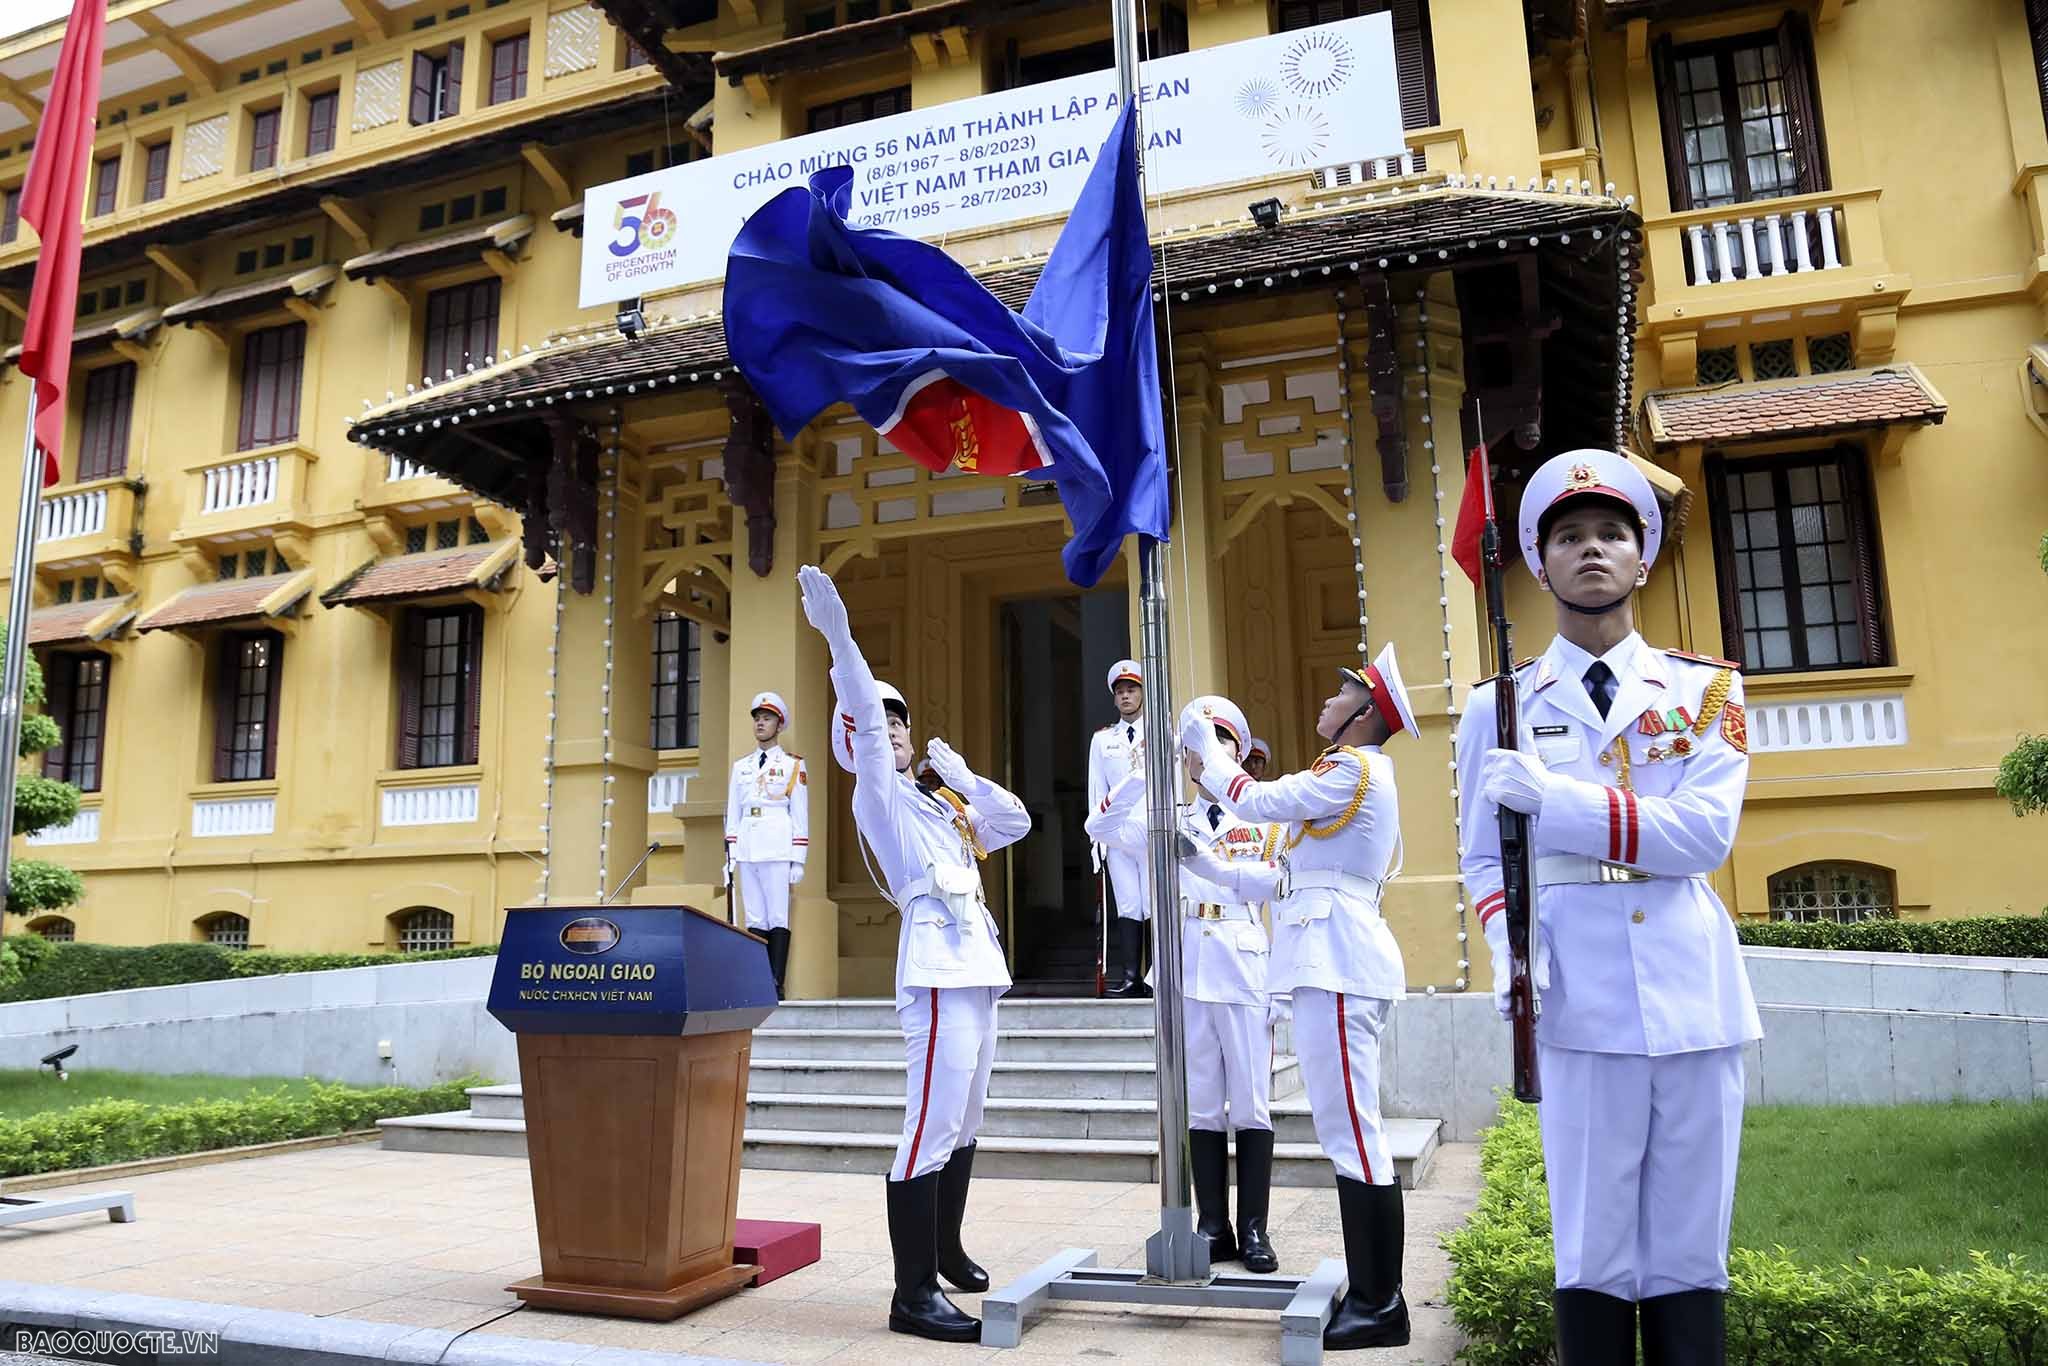 Foreign Minister chairs ASEAN flag-raising ceremony in Hanoi